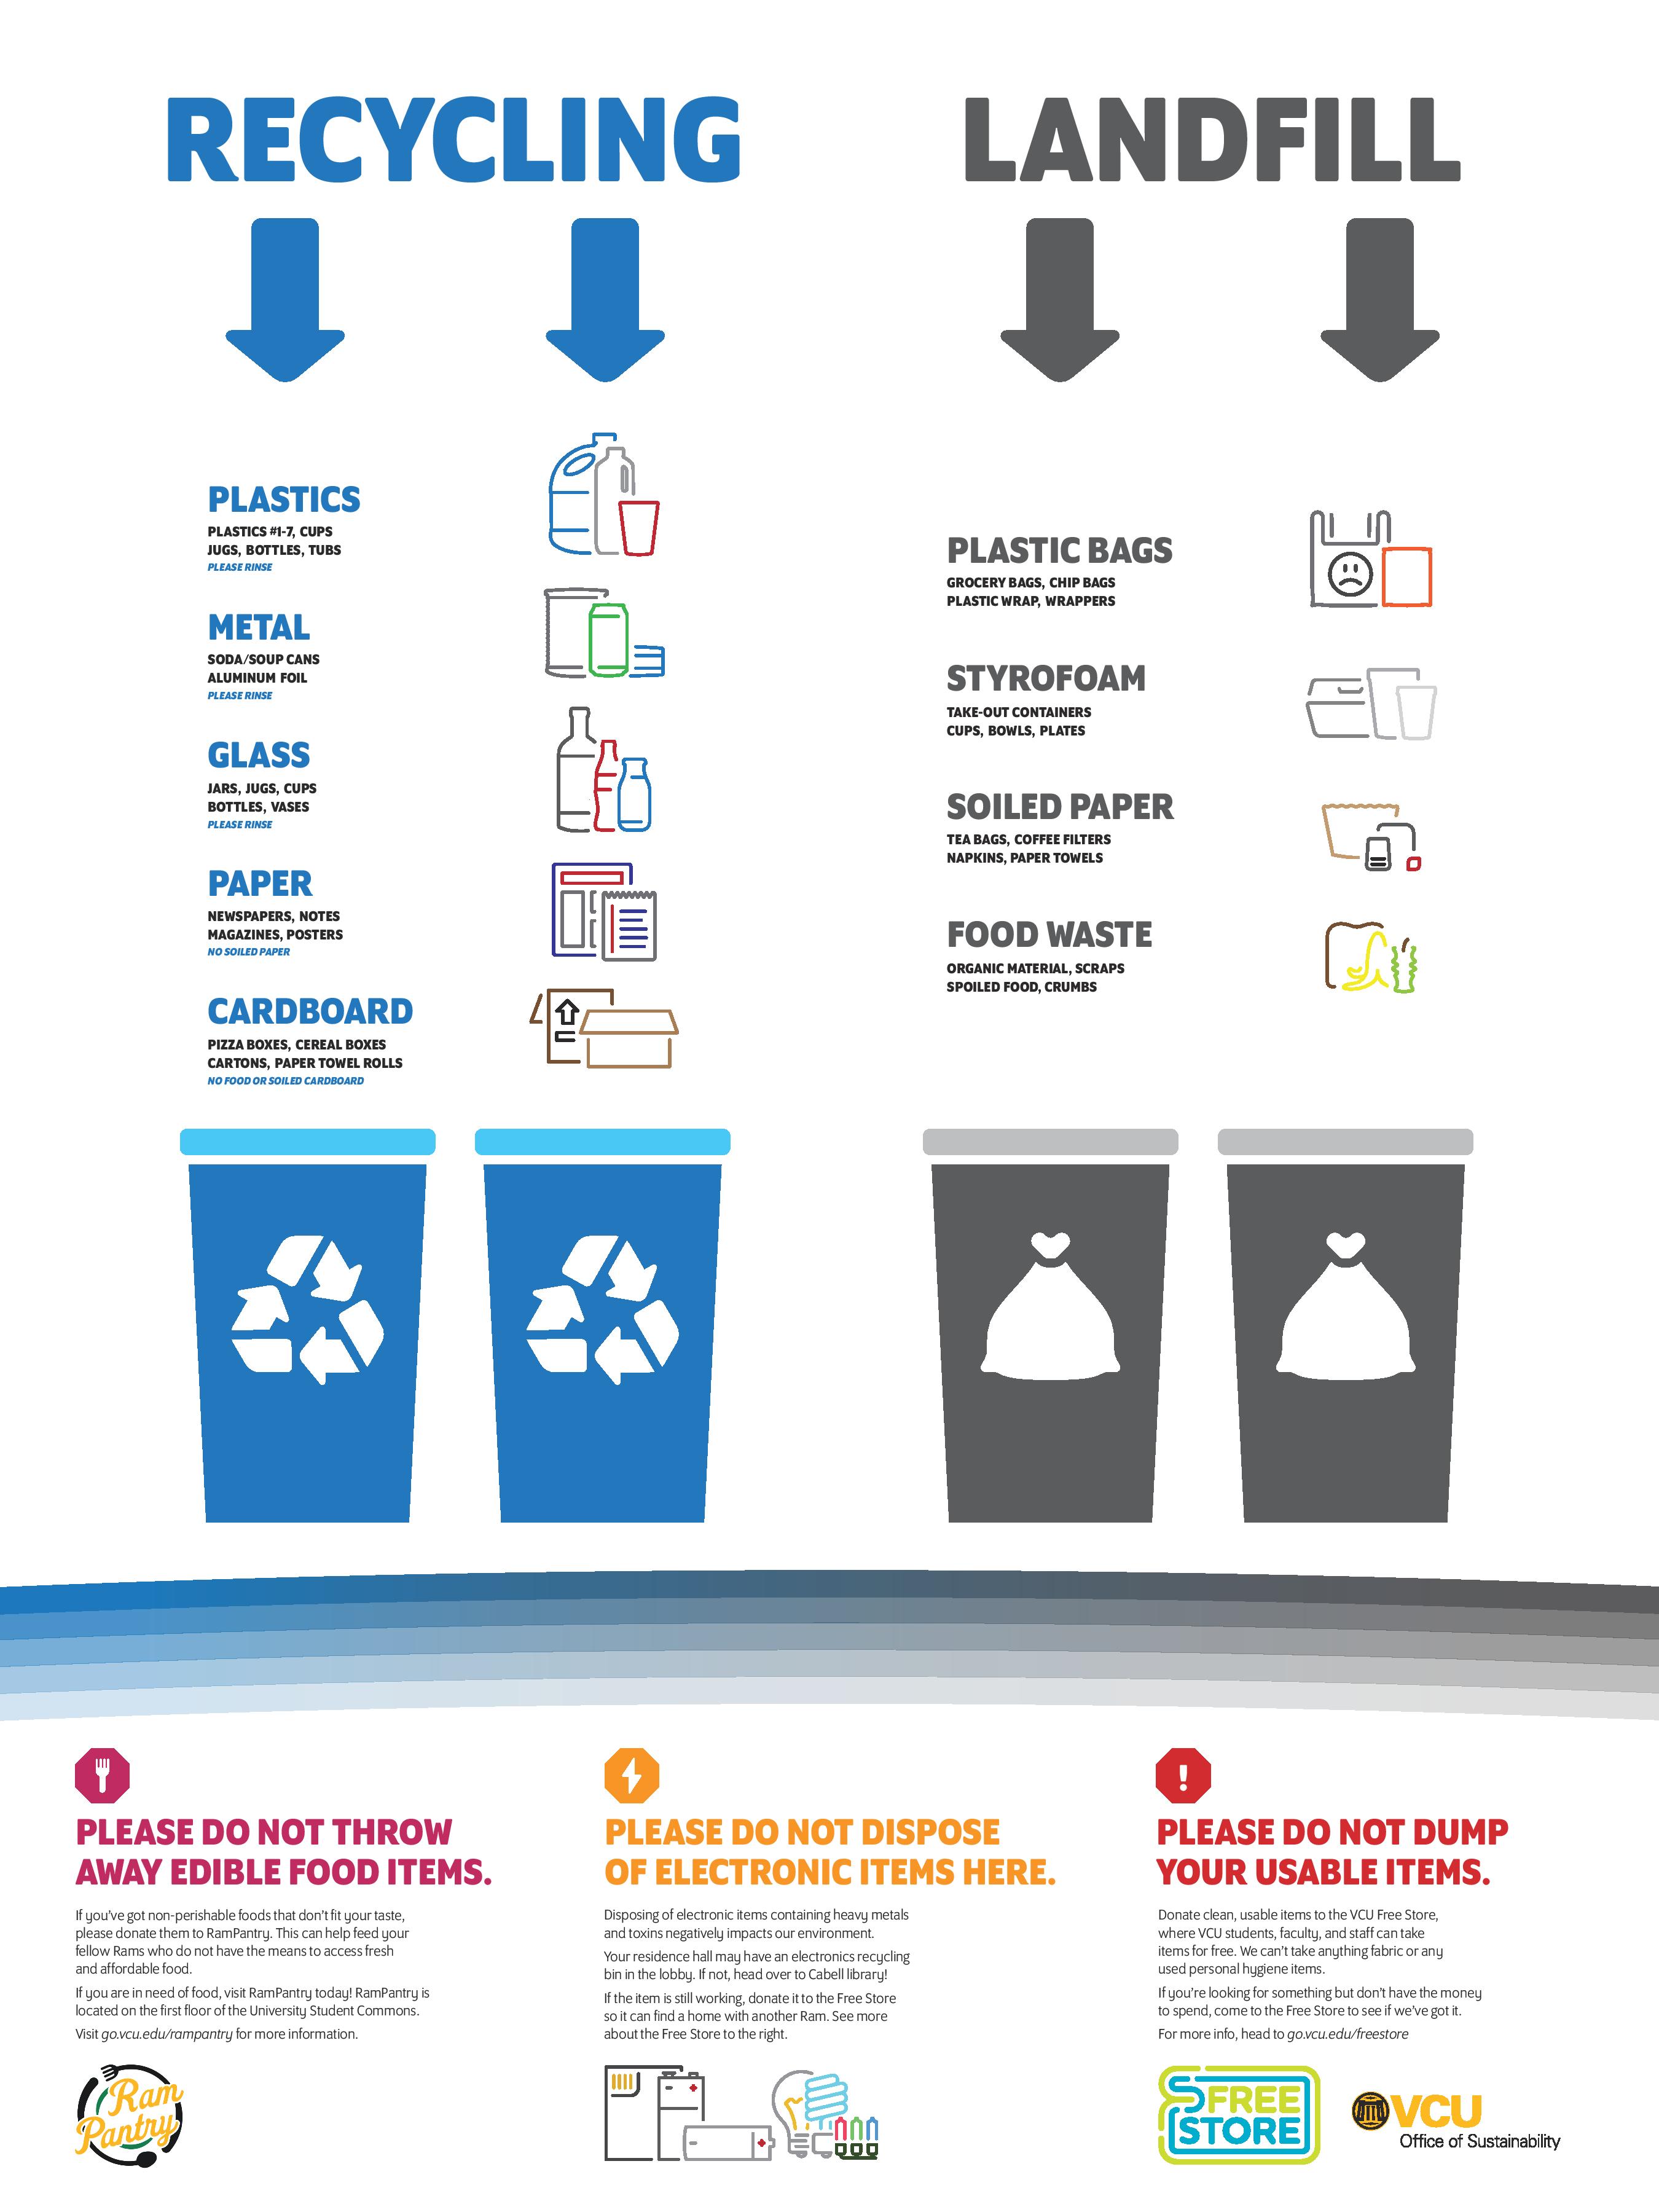 Vertical Recycling and Landfill Sticker for Residence Halls